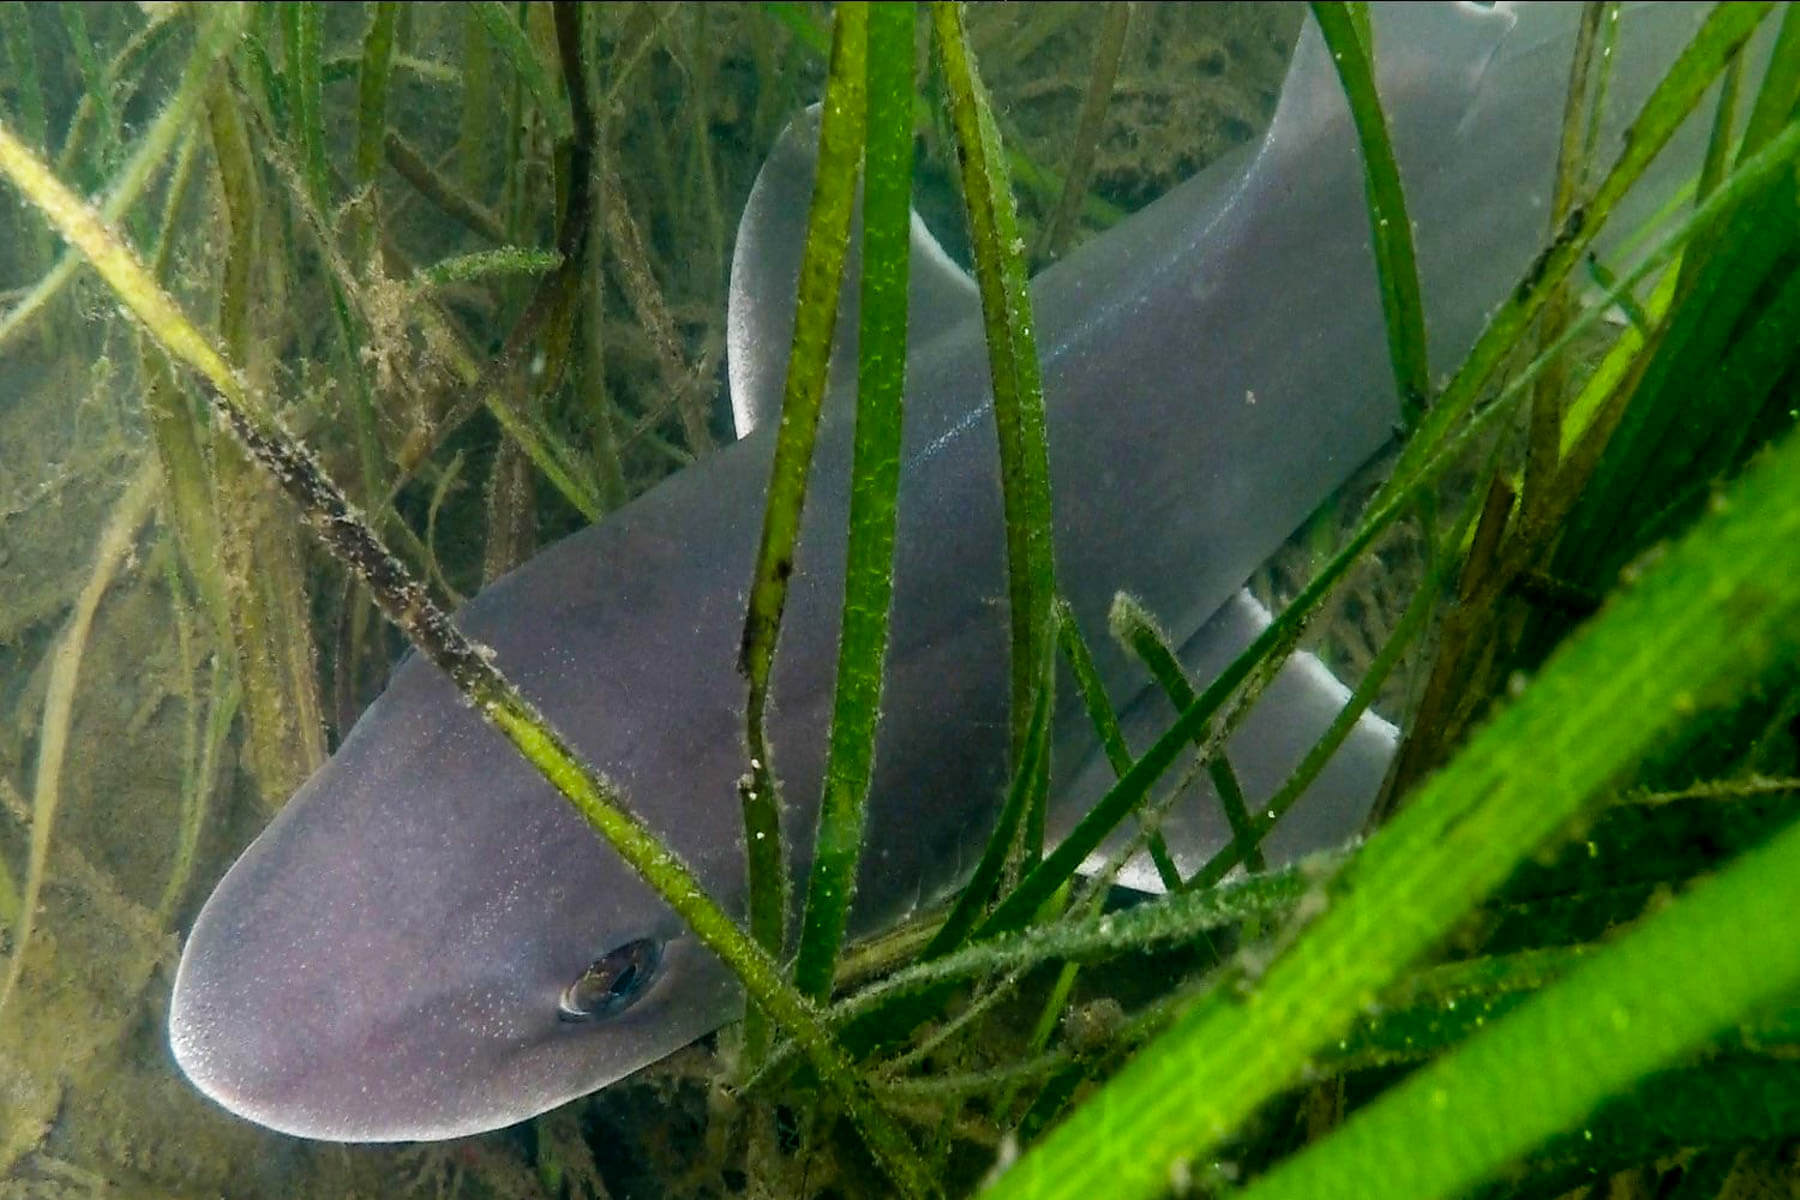 Smooth dogfish in submerged aquatic vegetation